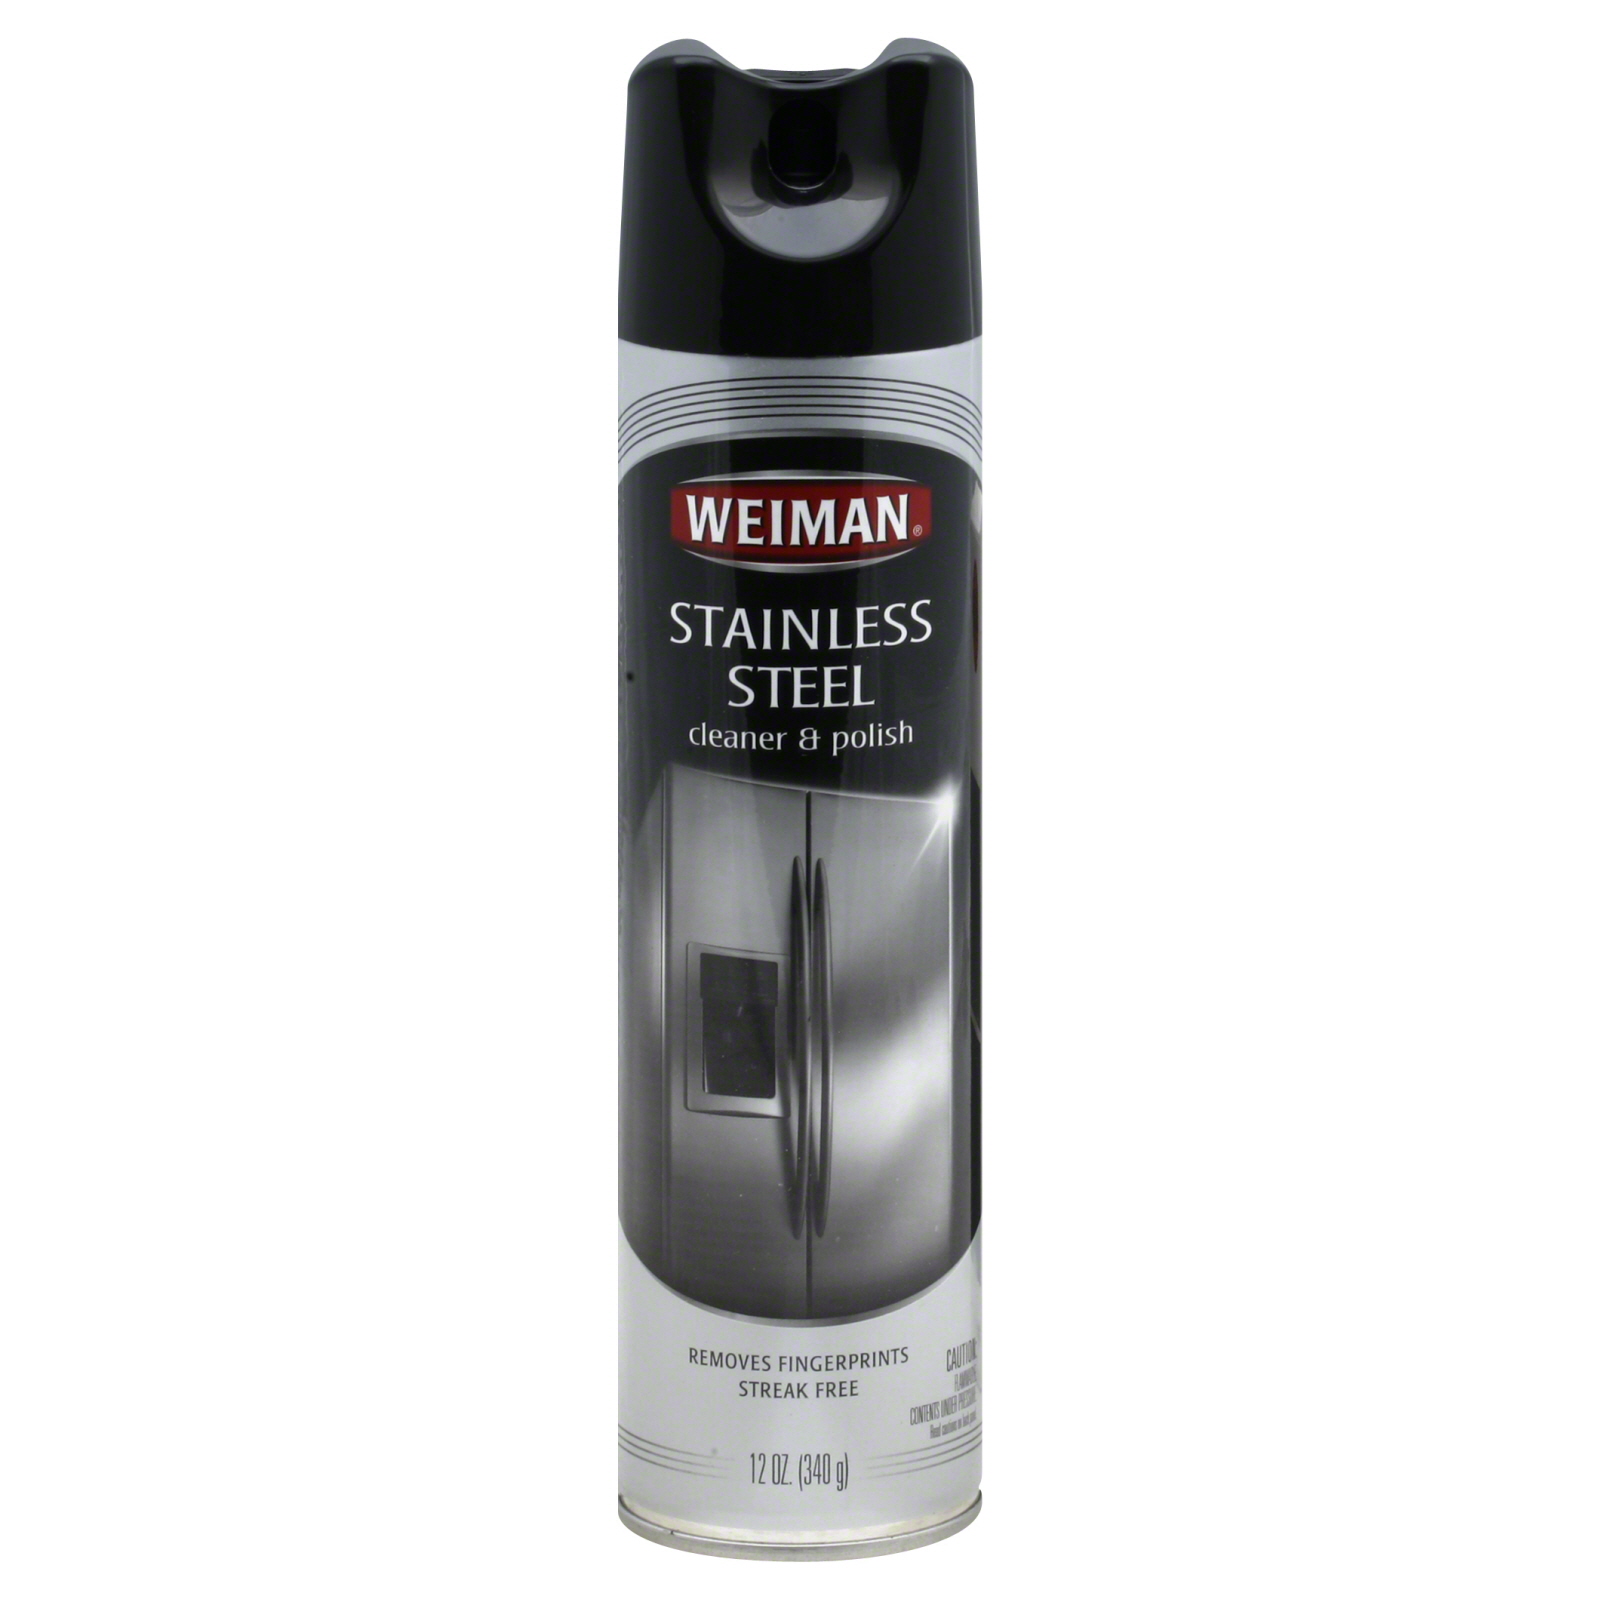 Weiman Cleaner & Polish, Stainless Steel, 12 oz (340 g)